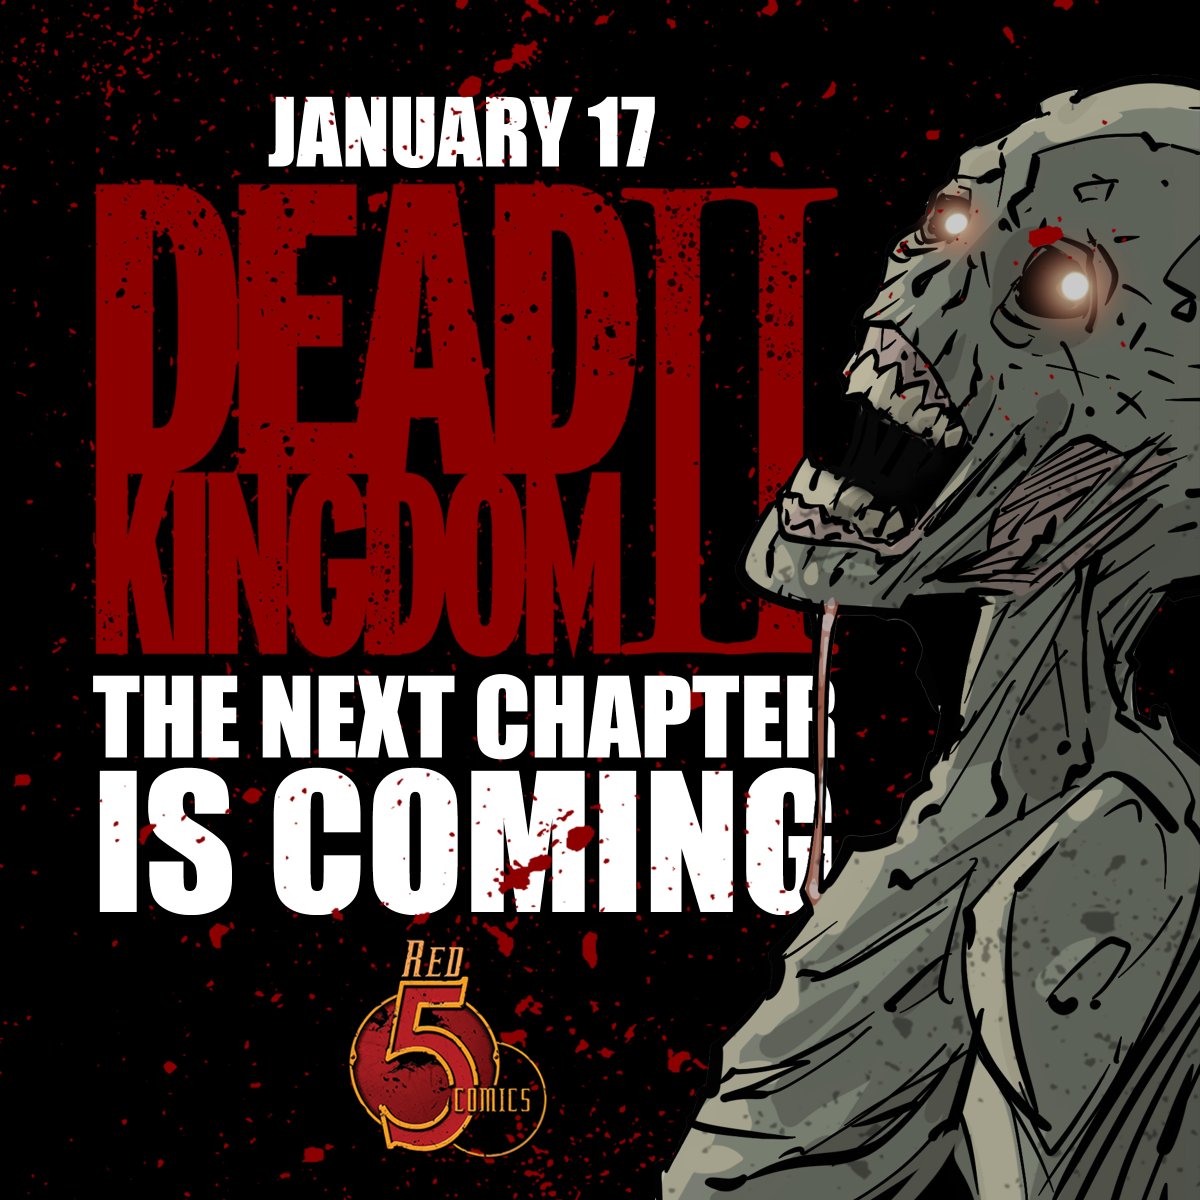 A new chapter begins! Dead Kingdom Vol.2 issue 1 will be available next week! Contact your local comic book store to get your copy.

From @red5comics 

@Mtlcomiccon @CBR @ComicsLotusland @Sparks_Comics @mtlcomic @blakesbuzz @Comic_Con @TheComicon @ComicCrusaders @Paul_thePullbox